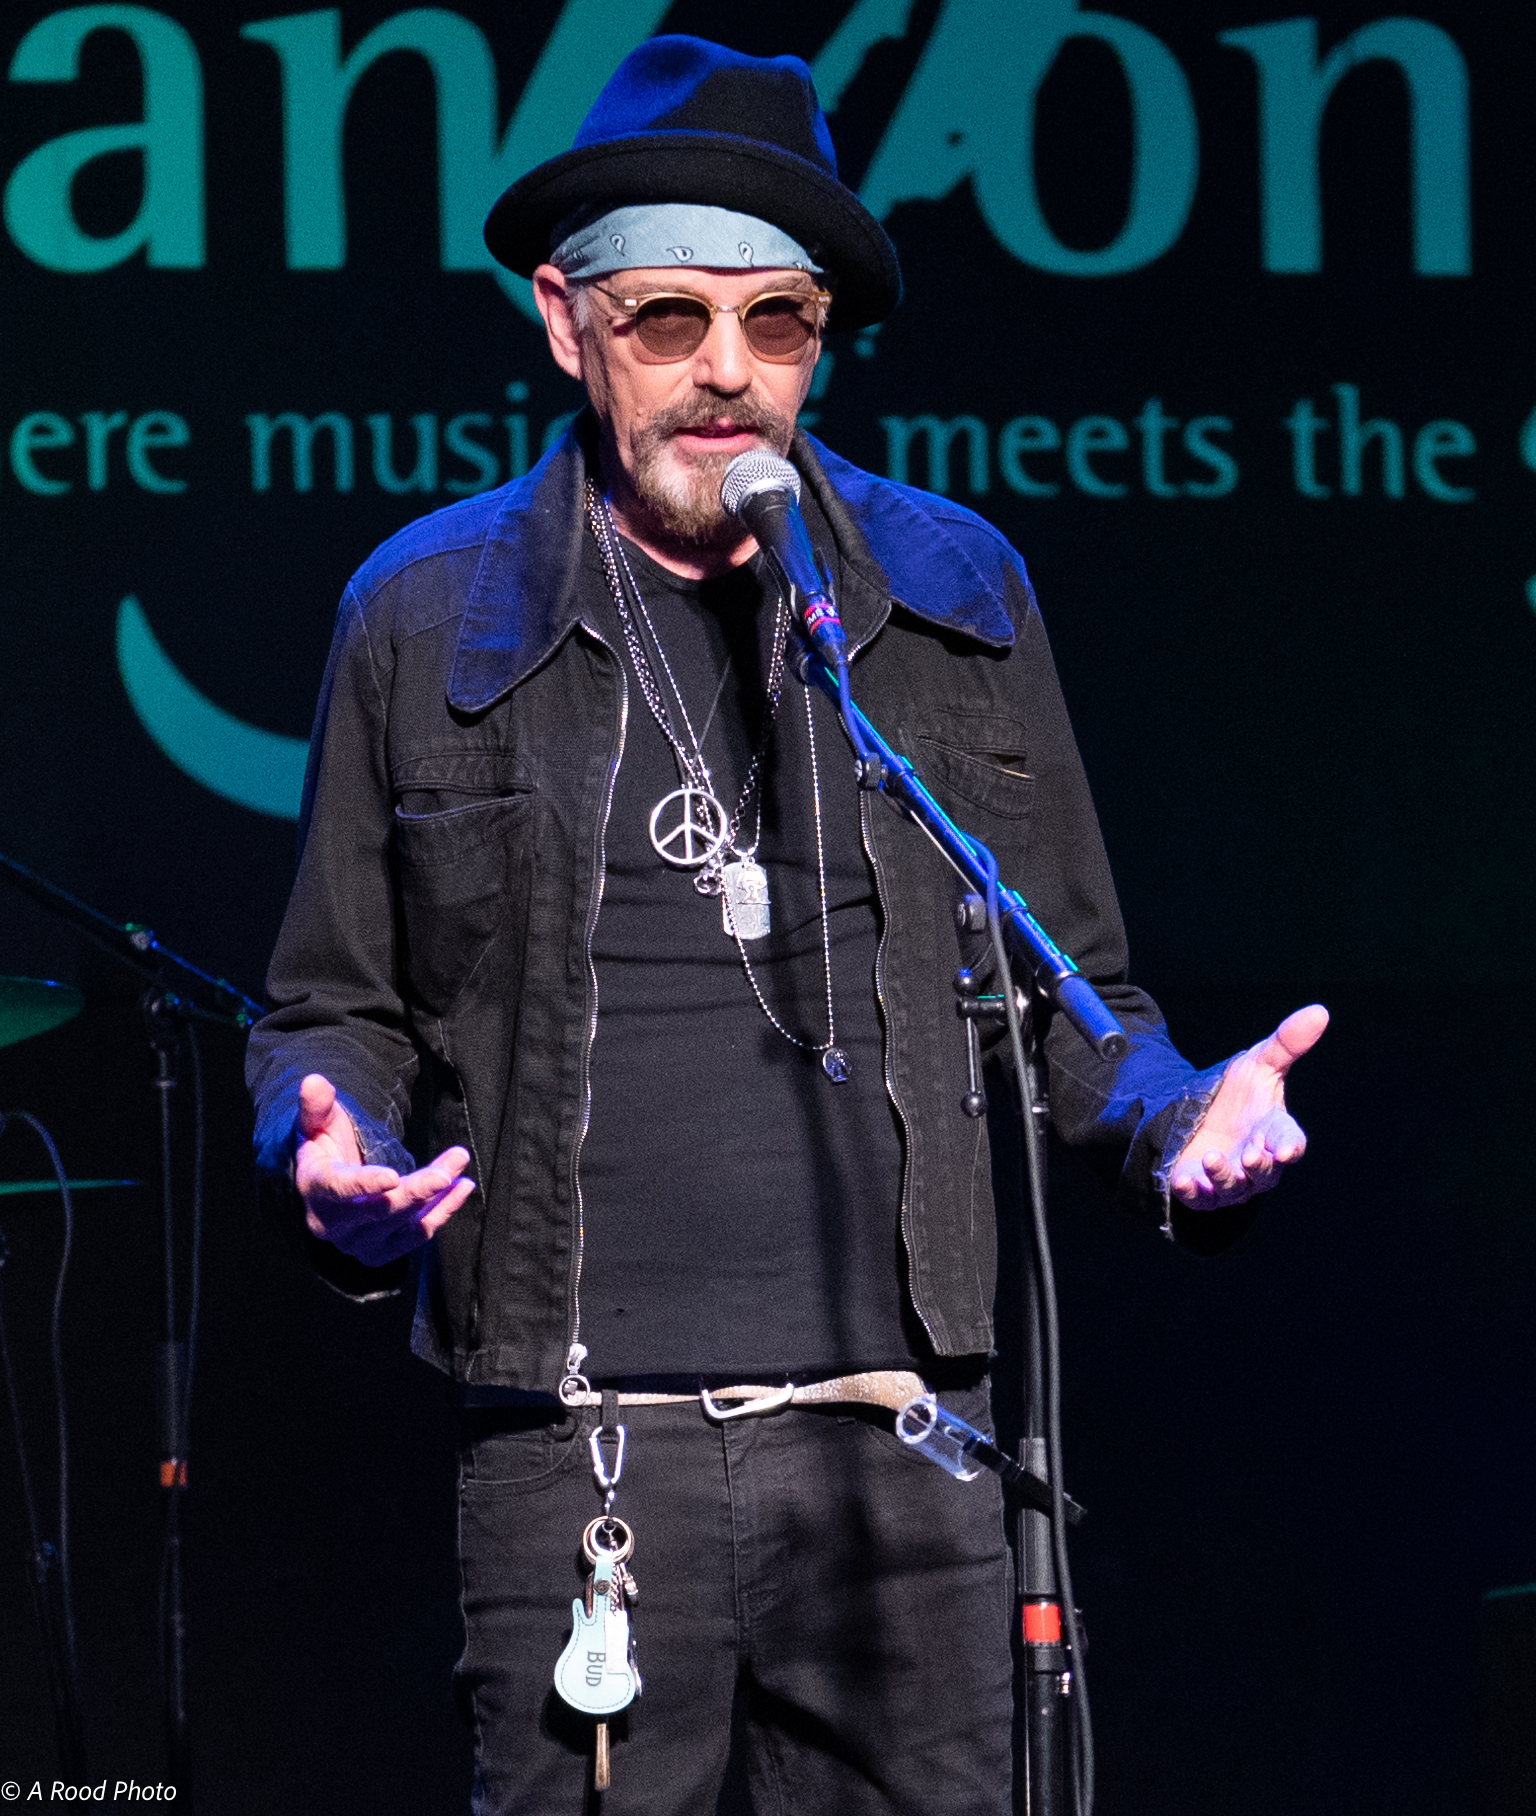 Billy Bob Thornton introduces The Nitty Gritty Dirty Band